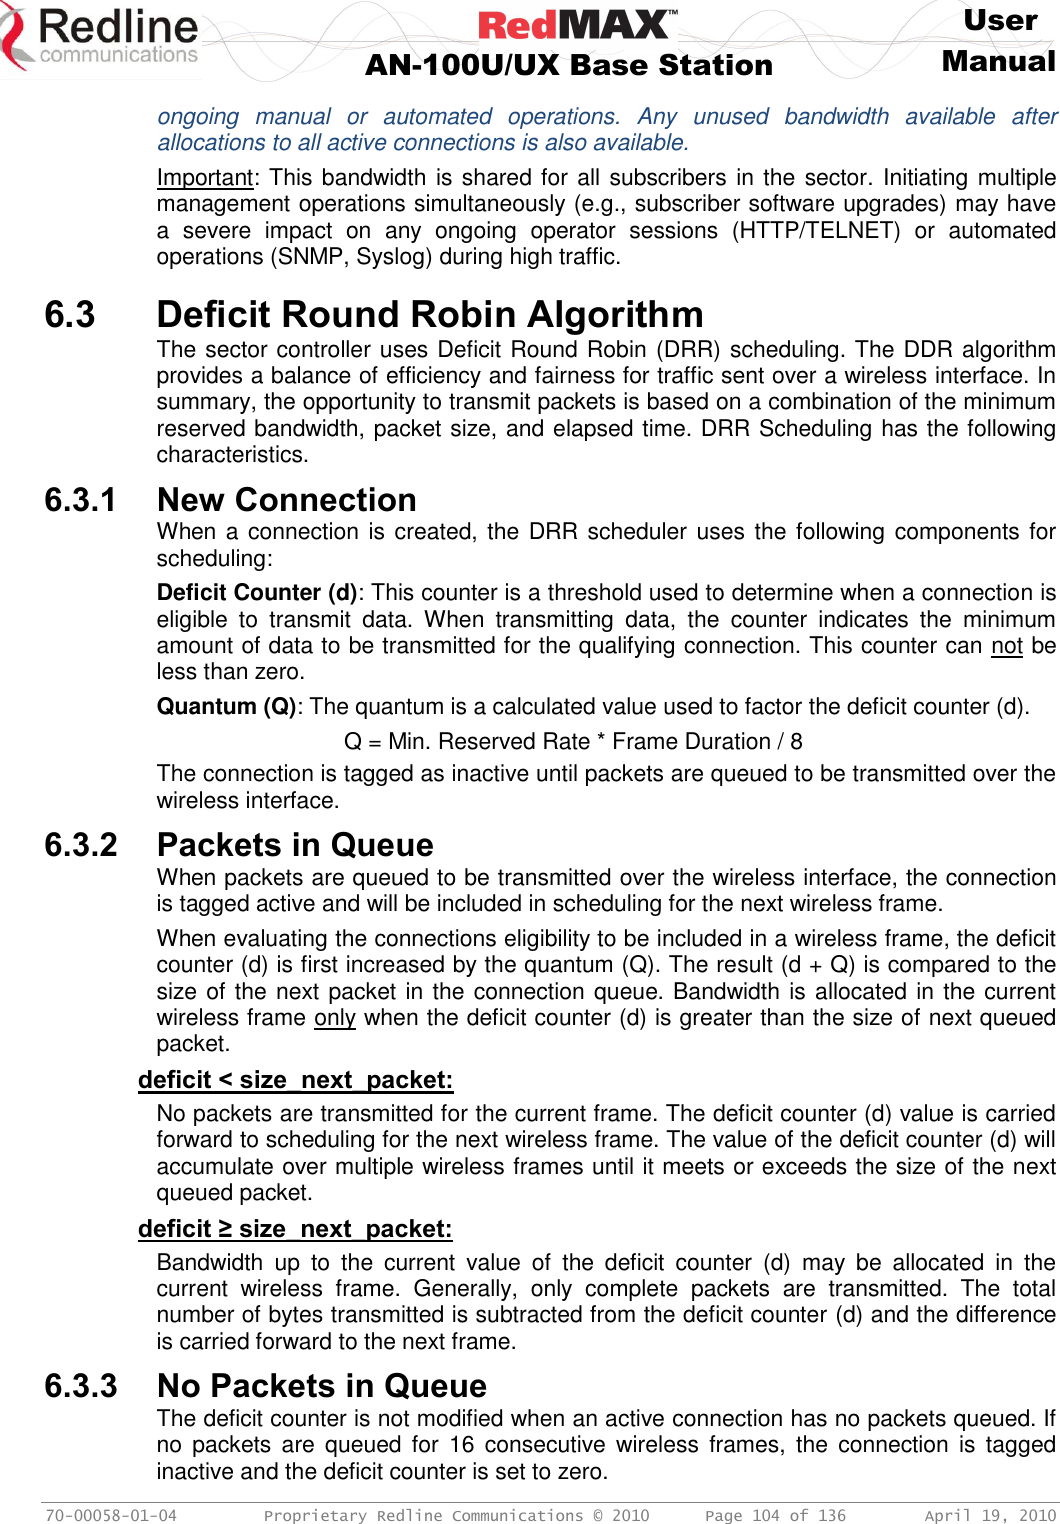     User  AN-100U/UX Base Station Manual   70-00058-01-04  Proprietary Redline Communications © 2010   Page 104 of 136  April 19, 2010 ongoing  manual  or  automated  operations.  Any  unused  bandwidth  available  after allocations to all active connections is also available. Important: This bandwidth is shared for all subscribers in the sector. Initiating multiple management operations simultaneously (e.g., subscriber software upgrades) may have a  severe  impact  on  any  ongoing  operator  sessions  (HTTP/TELNET)  or  automated operations (SNMP, Syslog) during high traffic.  6.3 Deficit Round Robin Algorithm The sector controller uses Deficit Round Robin (DRR) scheduling. The DDR algorithm provides a balance of efficiency and fairness for traffic sent over a wireless interface. In summary, the opportunity to transmit packets is based on a combination of the minimum reserved bandwidth, packet size, and elapsed time. DRR Scheduling has the following characteristics.  6.3.1 New Connection When a connection is created, the DRR scheduler uses the following components for scheduling: Deficit Counter (d): This counter is a threshold used to determine when a connection is eligible  to  transmit  data.  When  transmitting  data,  the  counter  indicates  the  minimum amount of data to be transmitted for the qualifying connection. This counter can not be less than zero. Quantum (Q): The quantum is a calculated value used to factor the deficit counter (d).   Q = Min. Reserved Rate * Frame Duration / 8 The connection is tagged as inactive until packets are queued to be transmitted over the wireless interface. 6.3.2 Packets in Queue When packets are queued to be transmitted over the wireless interface, the connection is tagged active and will be included in scheduling for the next wireless frame. When evaluating the connections eligibility to be included in a wireless frame, the deficit counter (d) is first increased by the quantum (Q). The result (d + Q) is compared to the size of the next packet in the connection queue. Bandwidth is allocated in the current wireless frame only when the deficit counter (d) is greater than the size of next queued packet. deficit &lt; size_next_packet: No packets are transmitted for the current frame. The deficit counter (d) value is carried forward to scheduling for the next wireless frame. The value of the deficit counter (d) will accumulate over multiple wireless frames until it meets or exceeds the size of the next queued packet. deficit ≥ size_next_packet: Bandwidth  up  to  the  current  value  of  the  deficit  counter  (d)  may  be  allocated  in  the current  wireless  frame.  Generally,  only  complete  packets  are  transmitted.  The  total number of bytes transmitted is subtracted from the deficit counter (d) and the difference is carried forward to the next frame. 6.3.3 No Packets in Queue The deficit counter is not modified when an active connection has no packets queued. If no  packets  are  queued for  16  consecutive  wireless  frames,  the  connection  is  tagged inactive and the deficit counter is set to zero.  